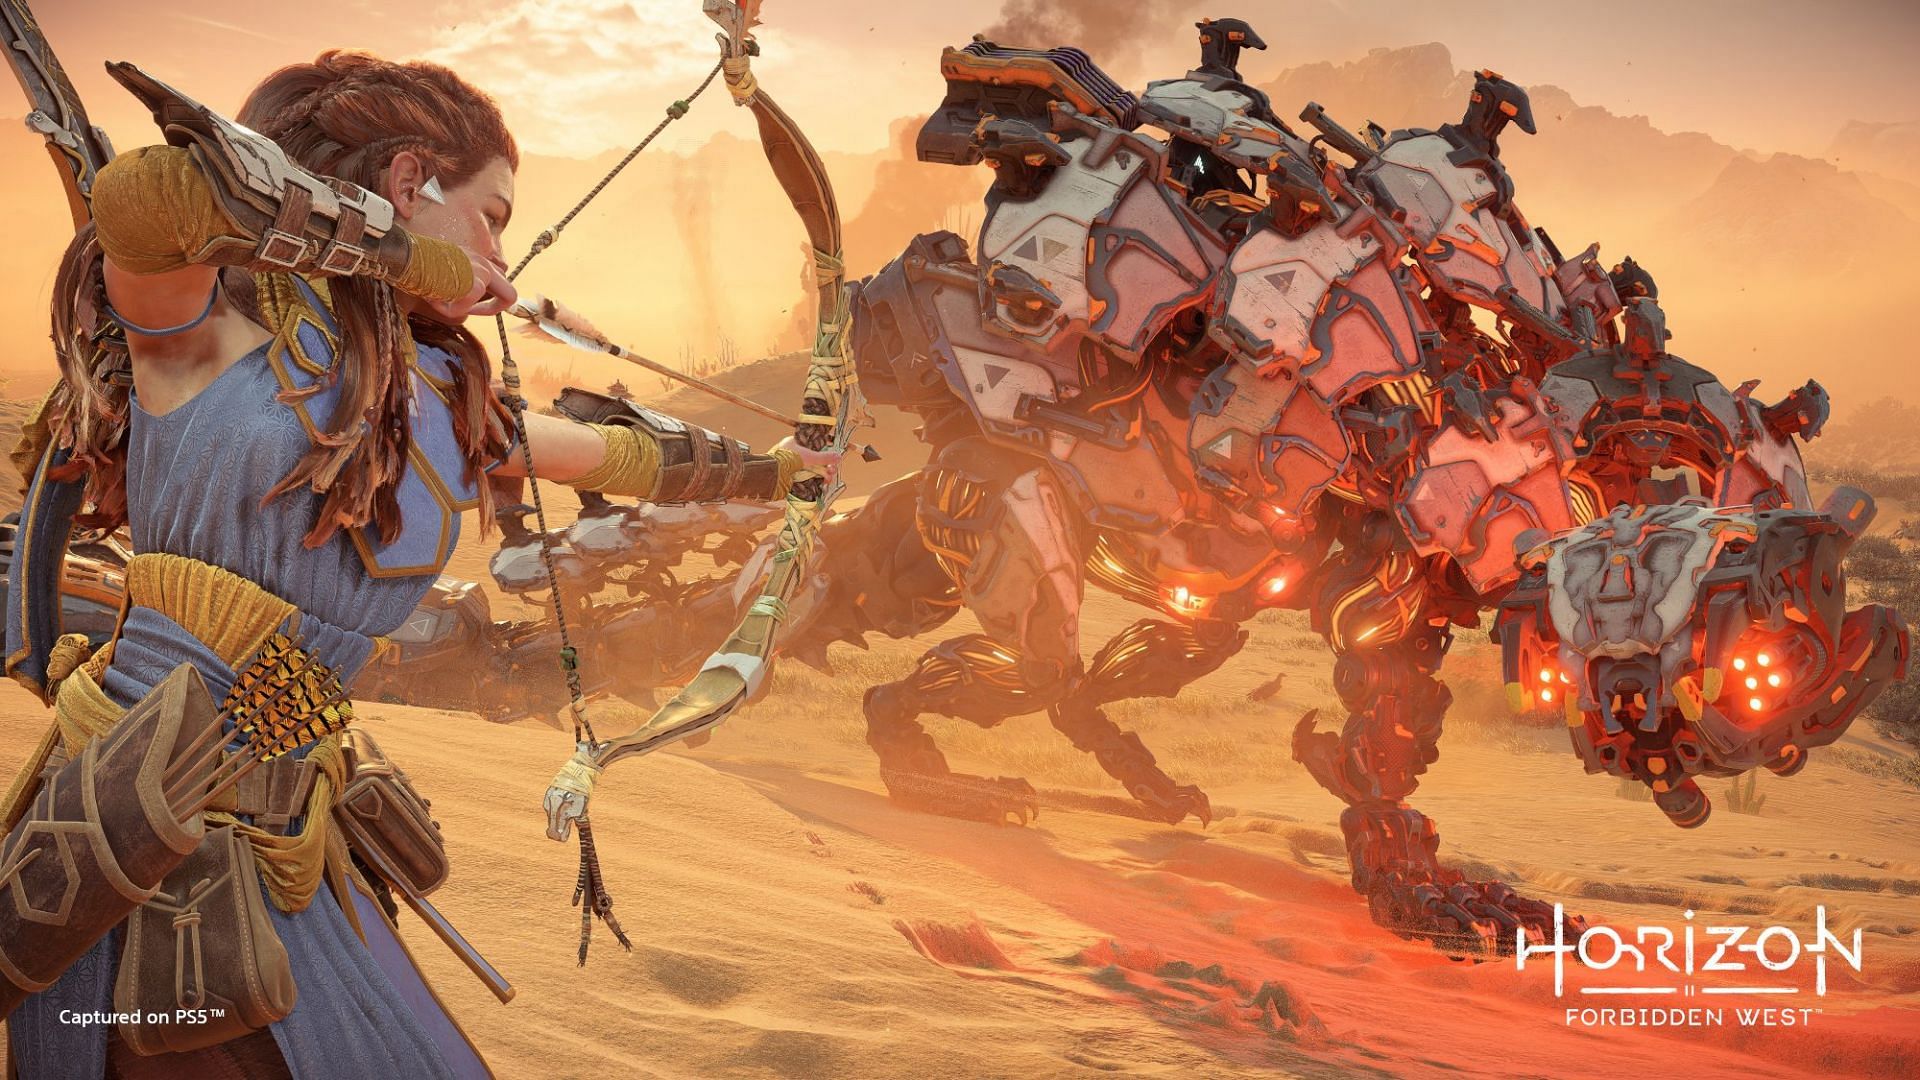 Aloy is aiming. (Image via Guerilla Games)